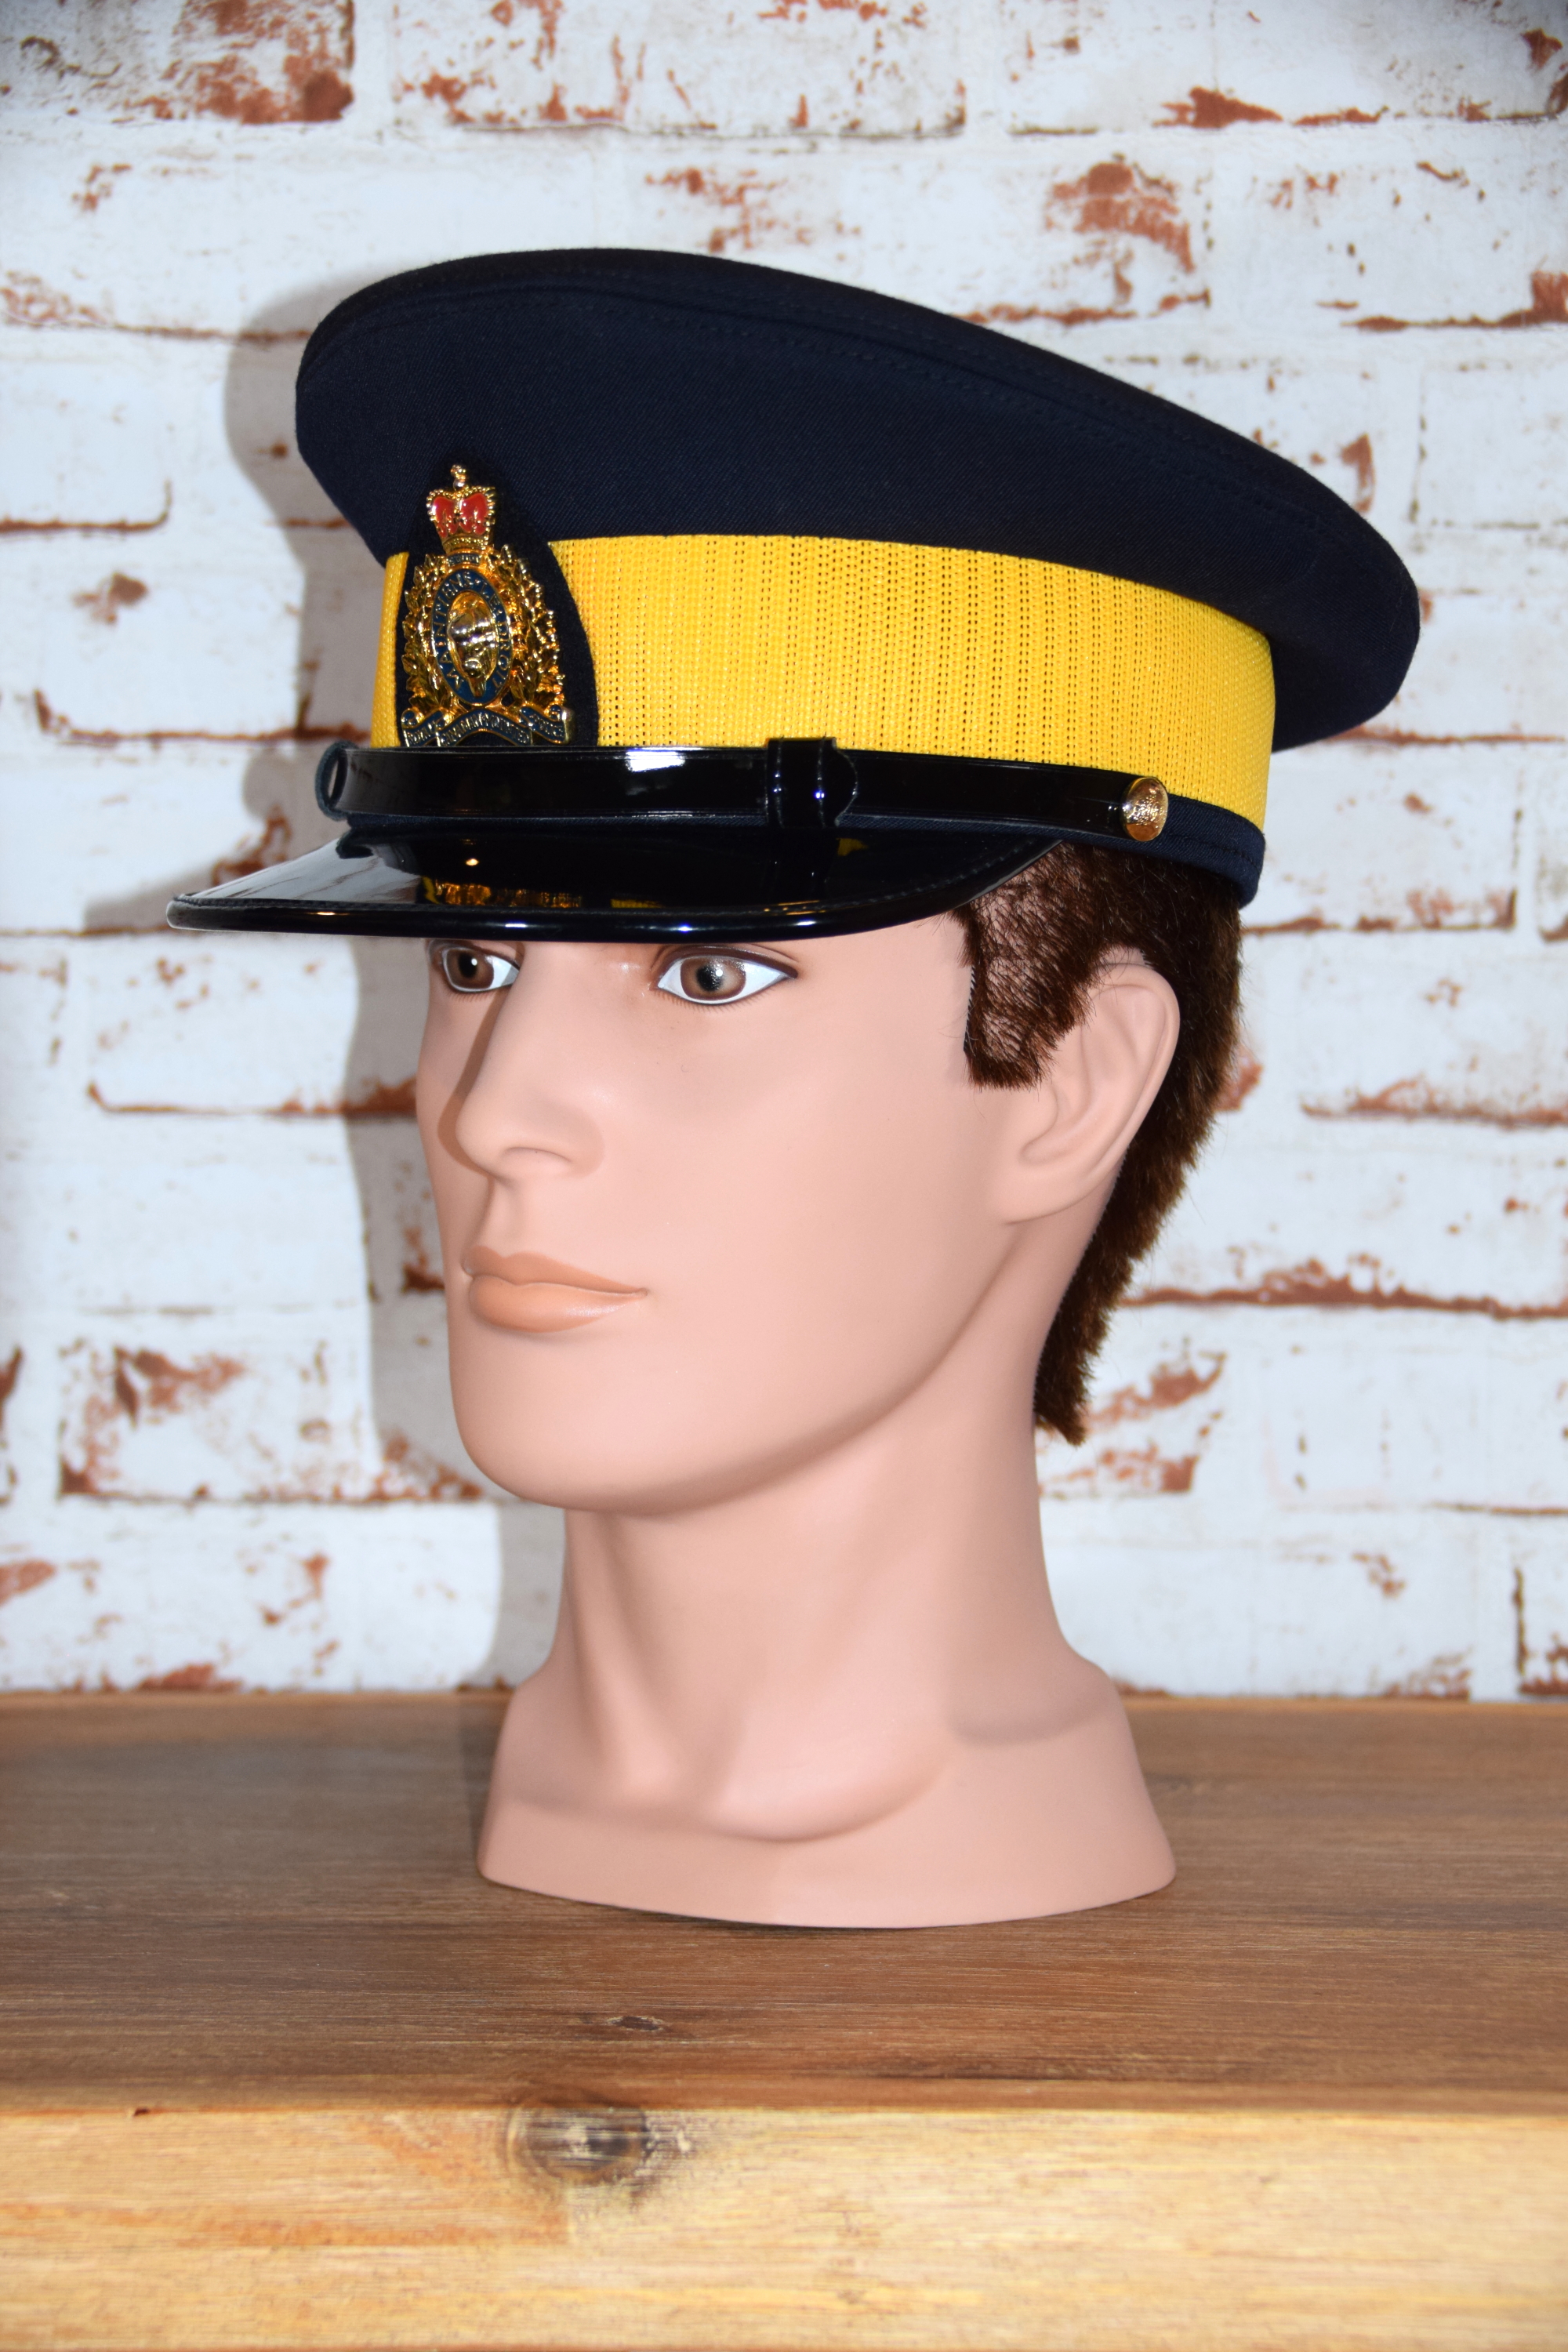 RCMP Constable